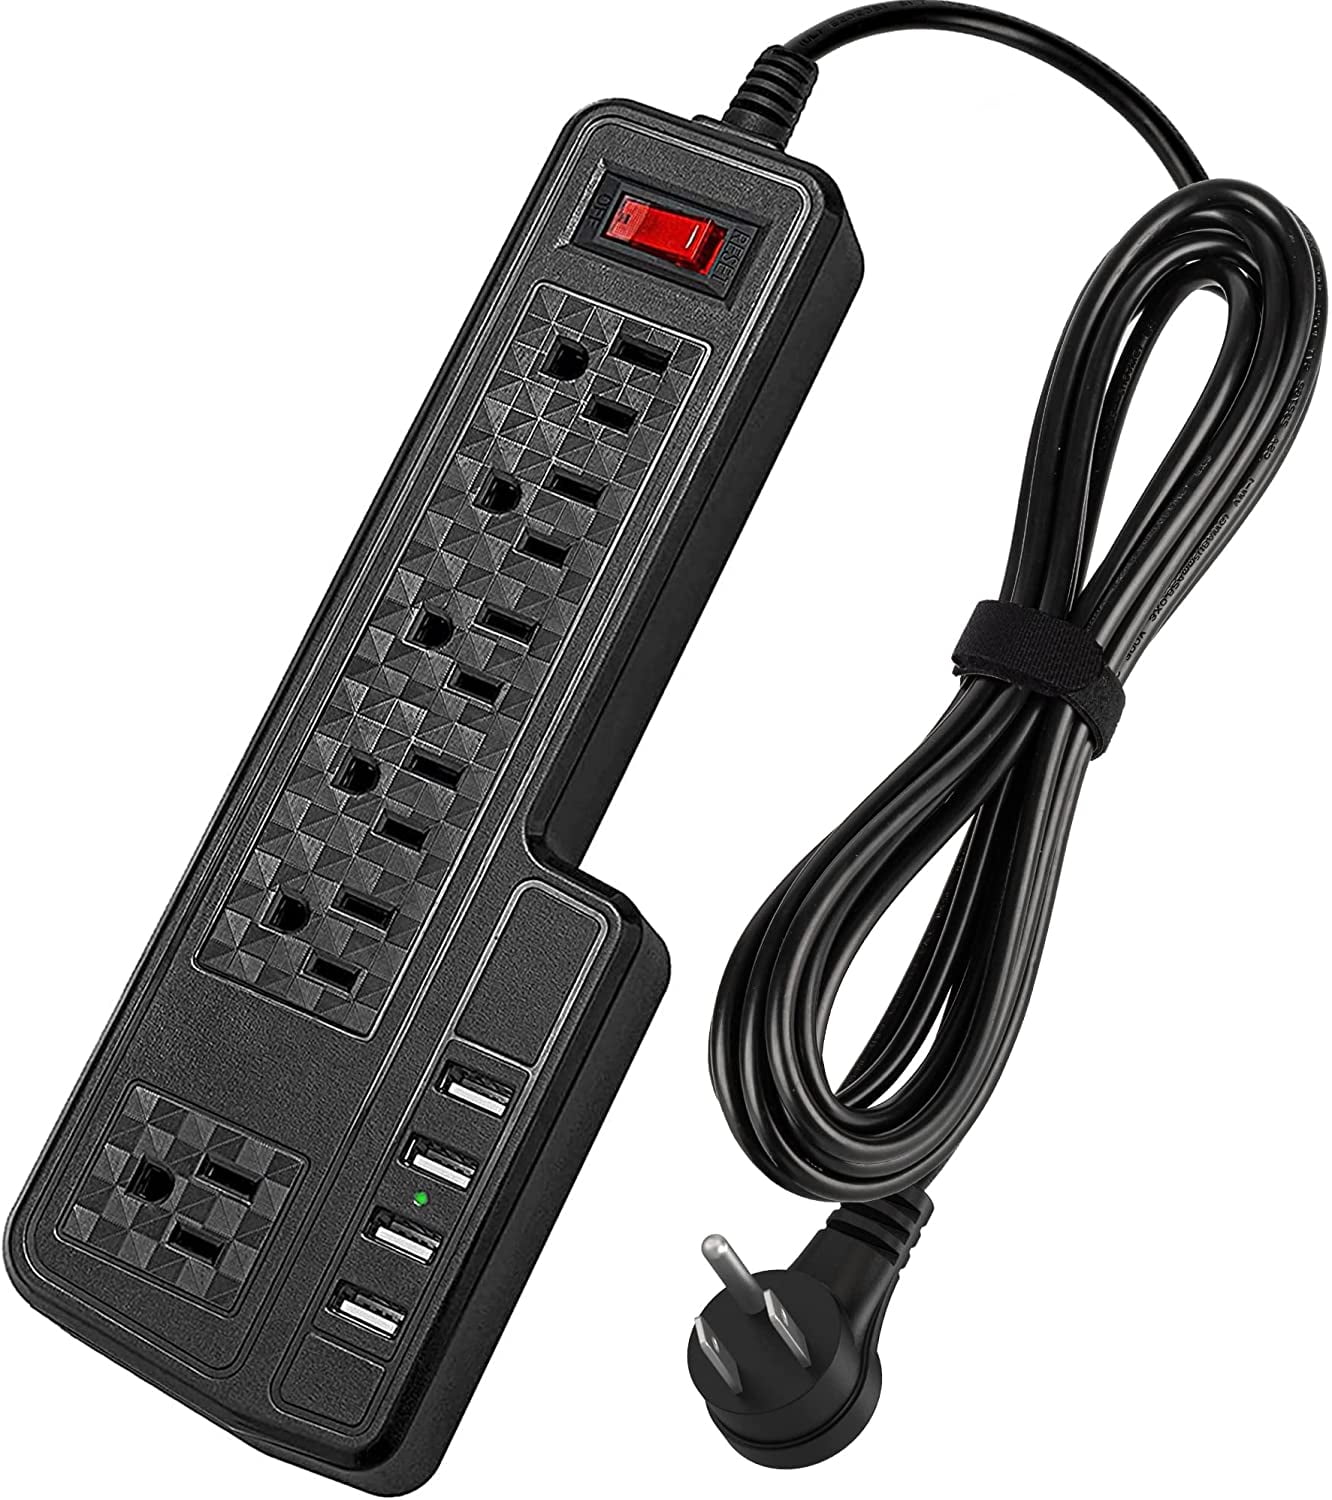 SUPERDANNY Surge Protector 6 Wide Outlets 4 USB Ports Power Strip 